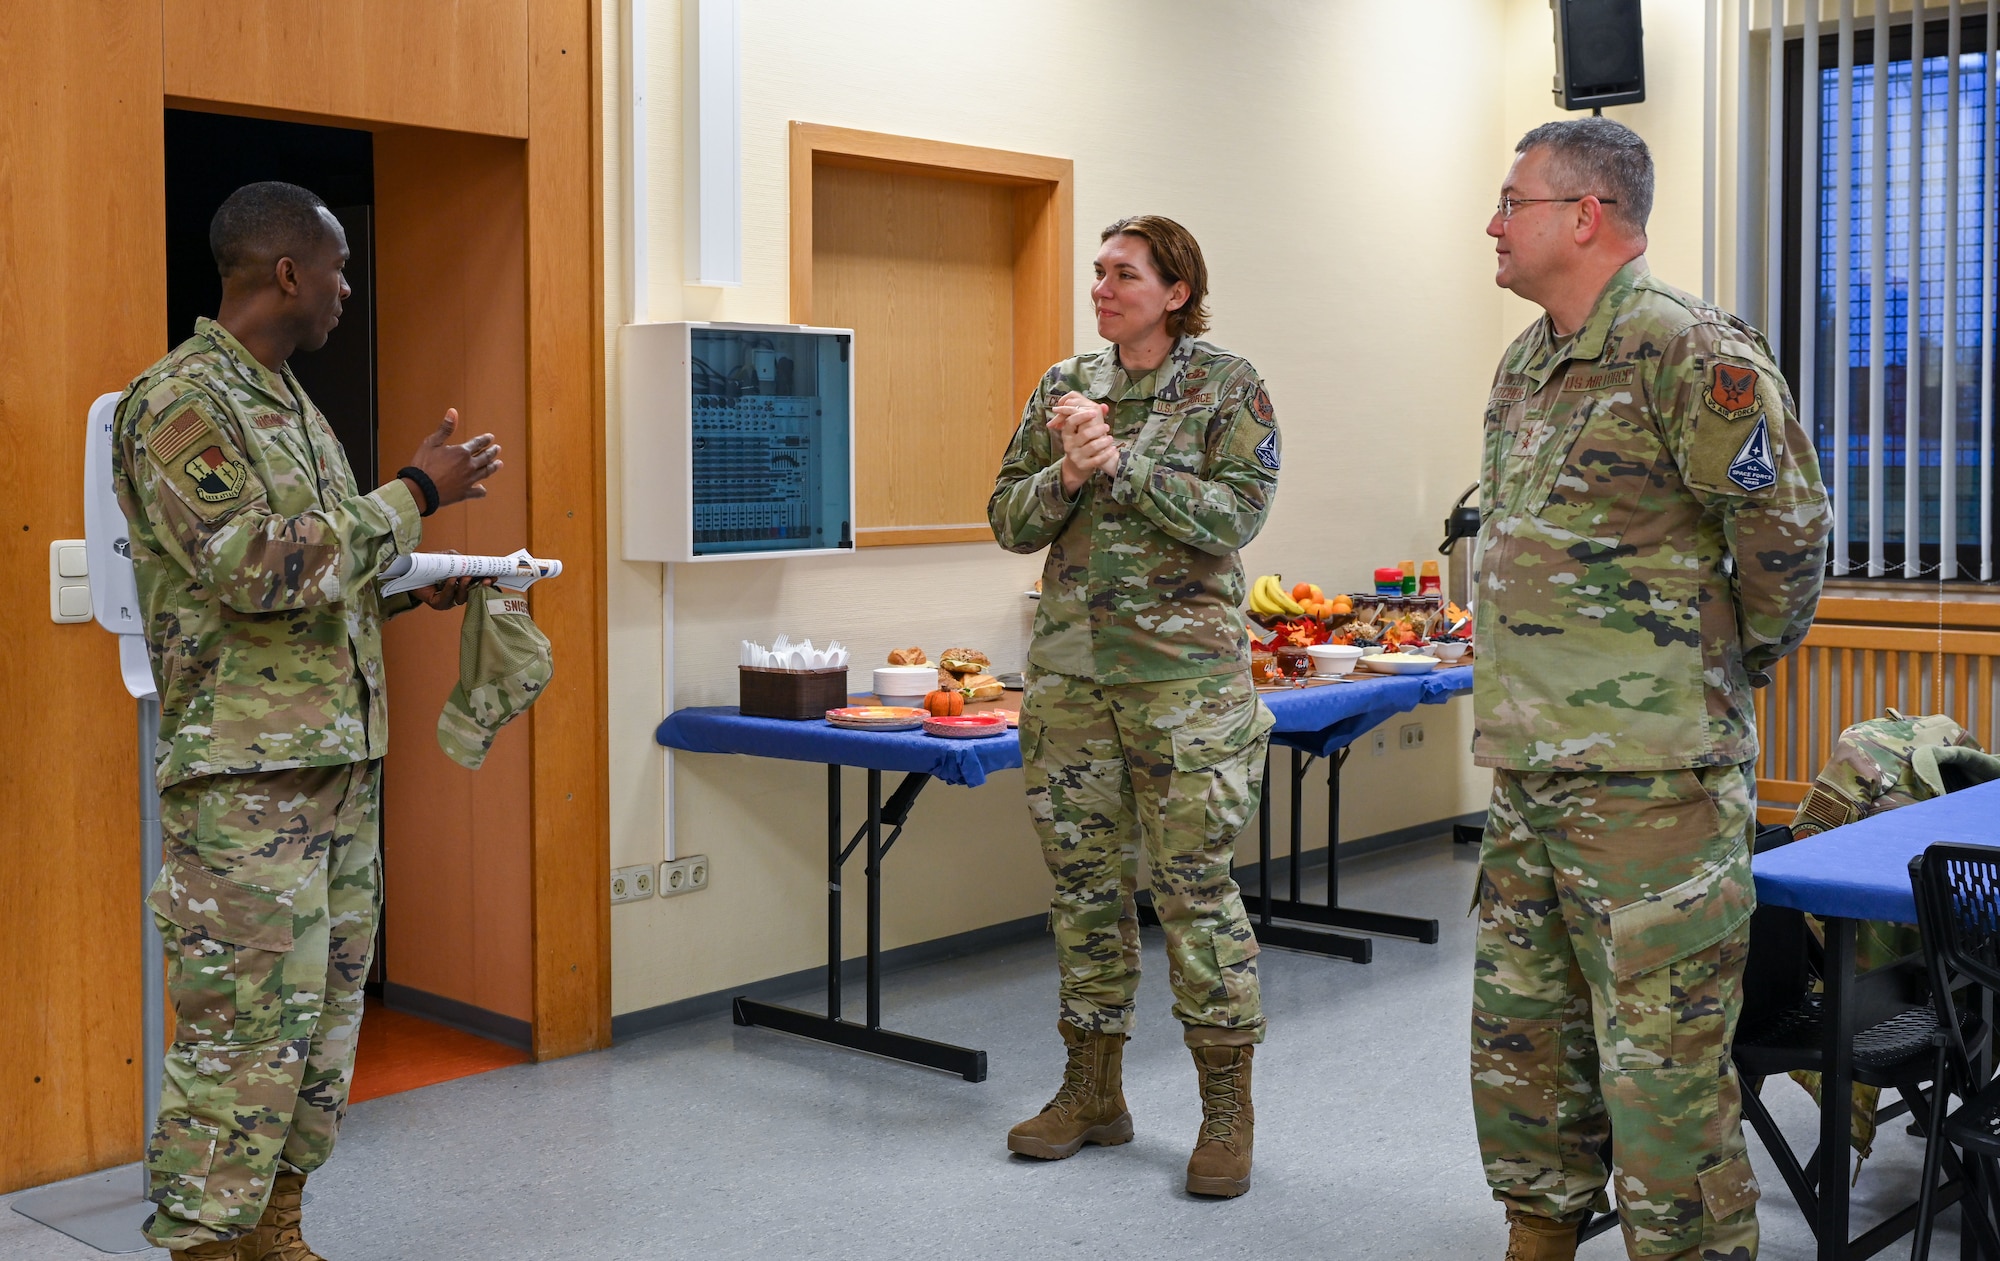 (Far left) Chaplain (Maj.) Anthony Wiggins, 52nd Fighter Wing, welcomes Chief Master Sgt. Sadie Chambers, Religious Affairs senior enlisted advisor, and Chaplain (Maj. Gen.) Randall Kitchens, U.S. Air Force chief of chaplains, at Spangdahlem Air Base, Germany, Nov. 16, 2022. The U.S. Air Force Chief of Chaplains organizes, trains and equips the Chaplain Corps to inspire readiness in others. (U.S. Air Force photo by Senior Airman Jessica Sanchez-Chen)